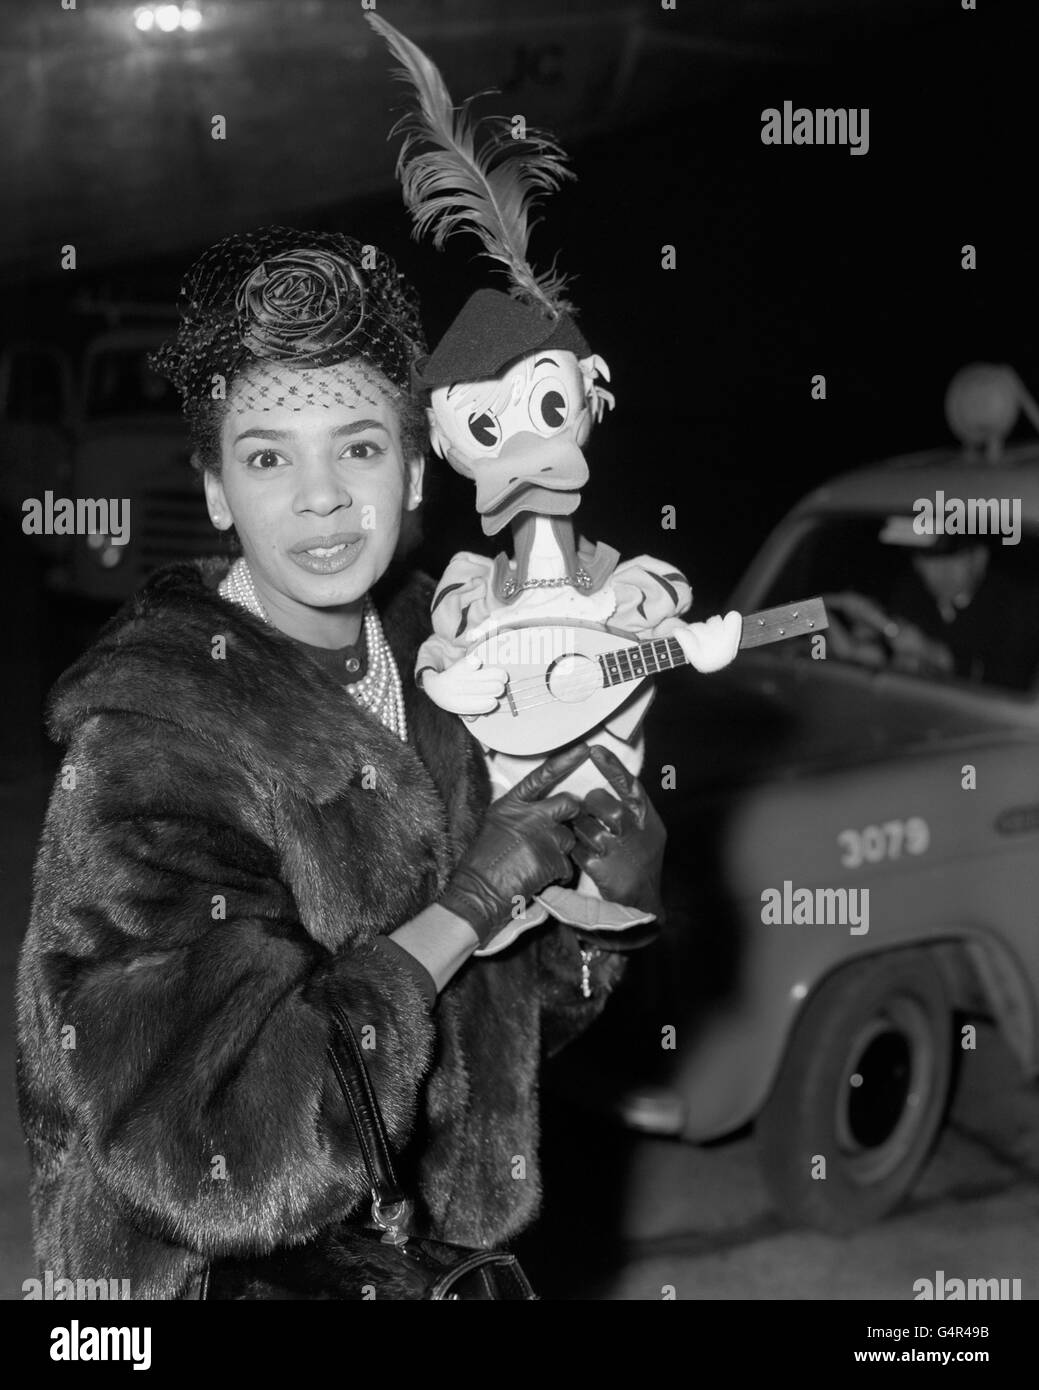 Singer Shirley Bassey with a Tyrolean-hatted Donald Duck mascot on arrival at London Airport from Italy, where she appeared in Milan and on TV. She is to fulfil engagements this year at Coventry, on British TV, and will have a summer season at Bournemouth. Stock Photo